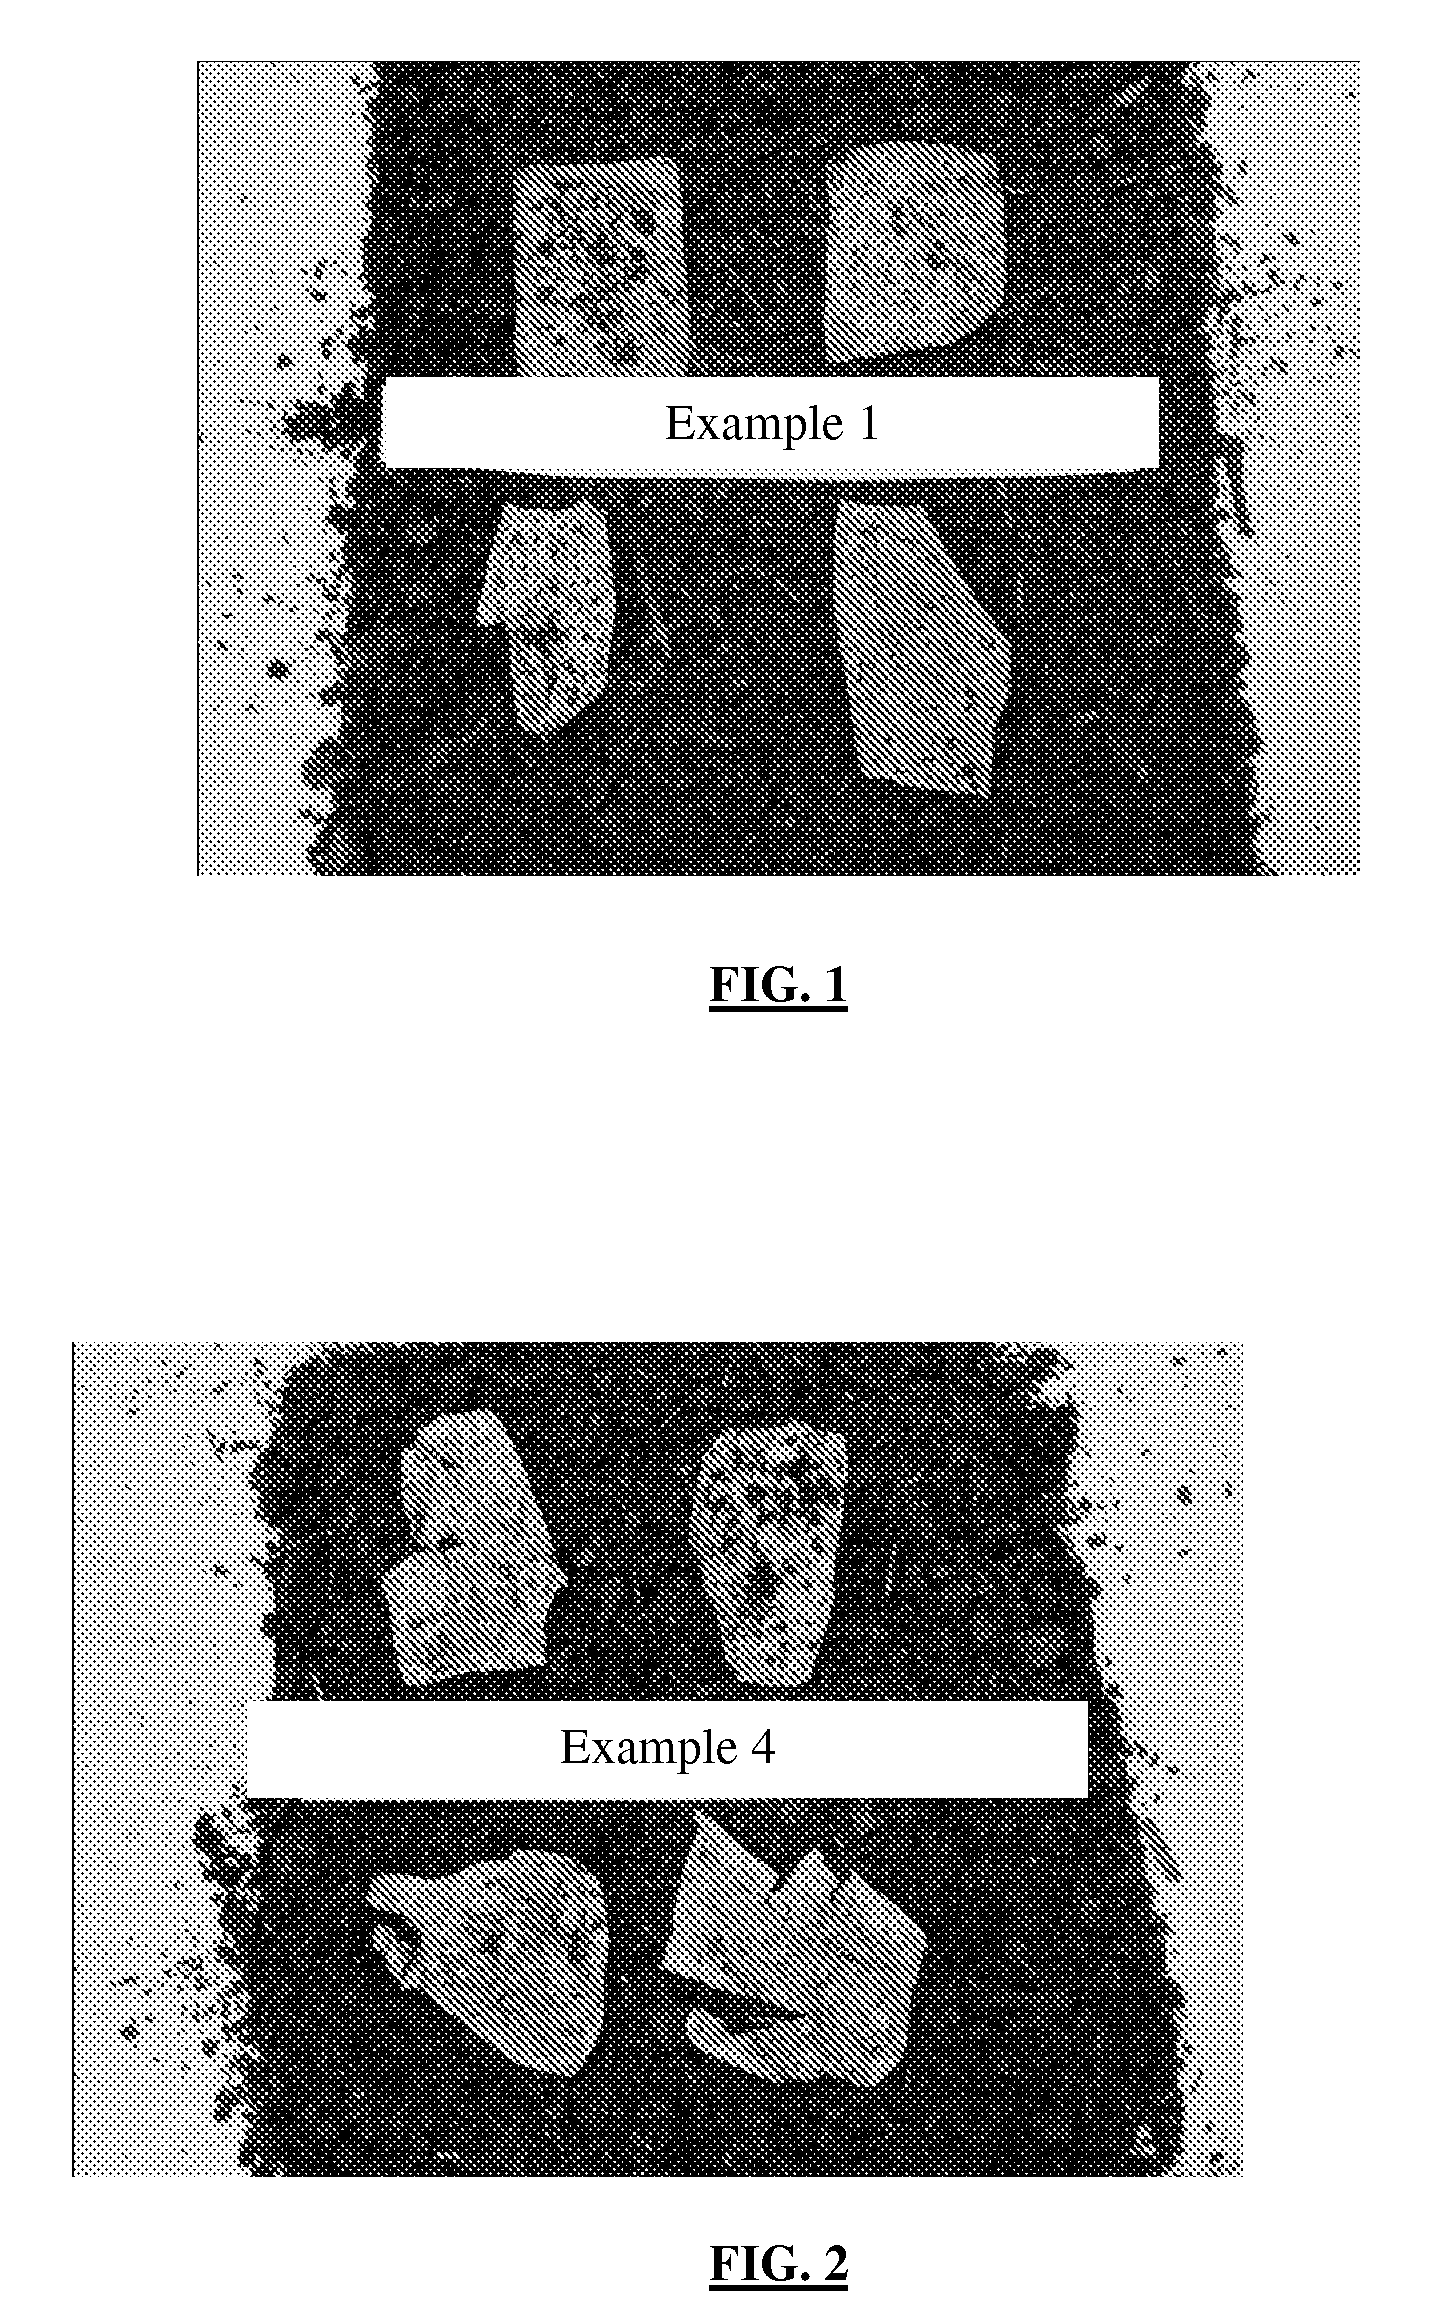 Biaxially oriented polylactic acid film with high barrier